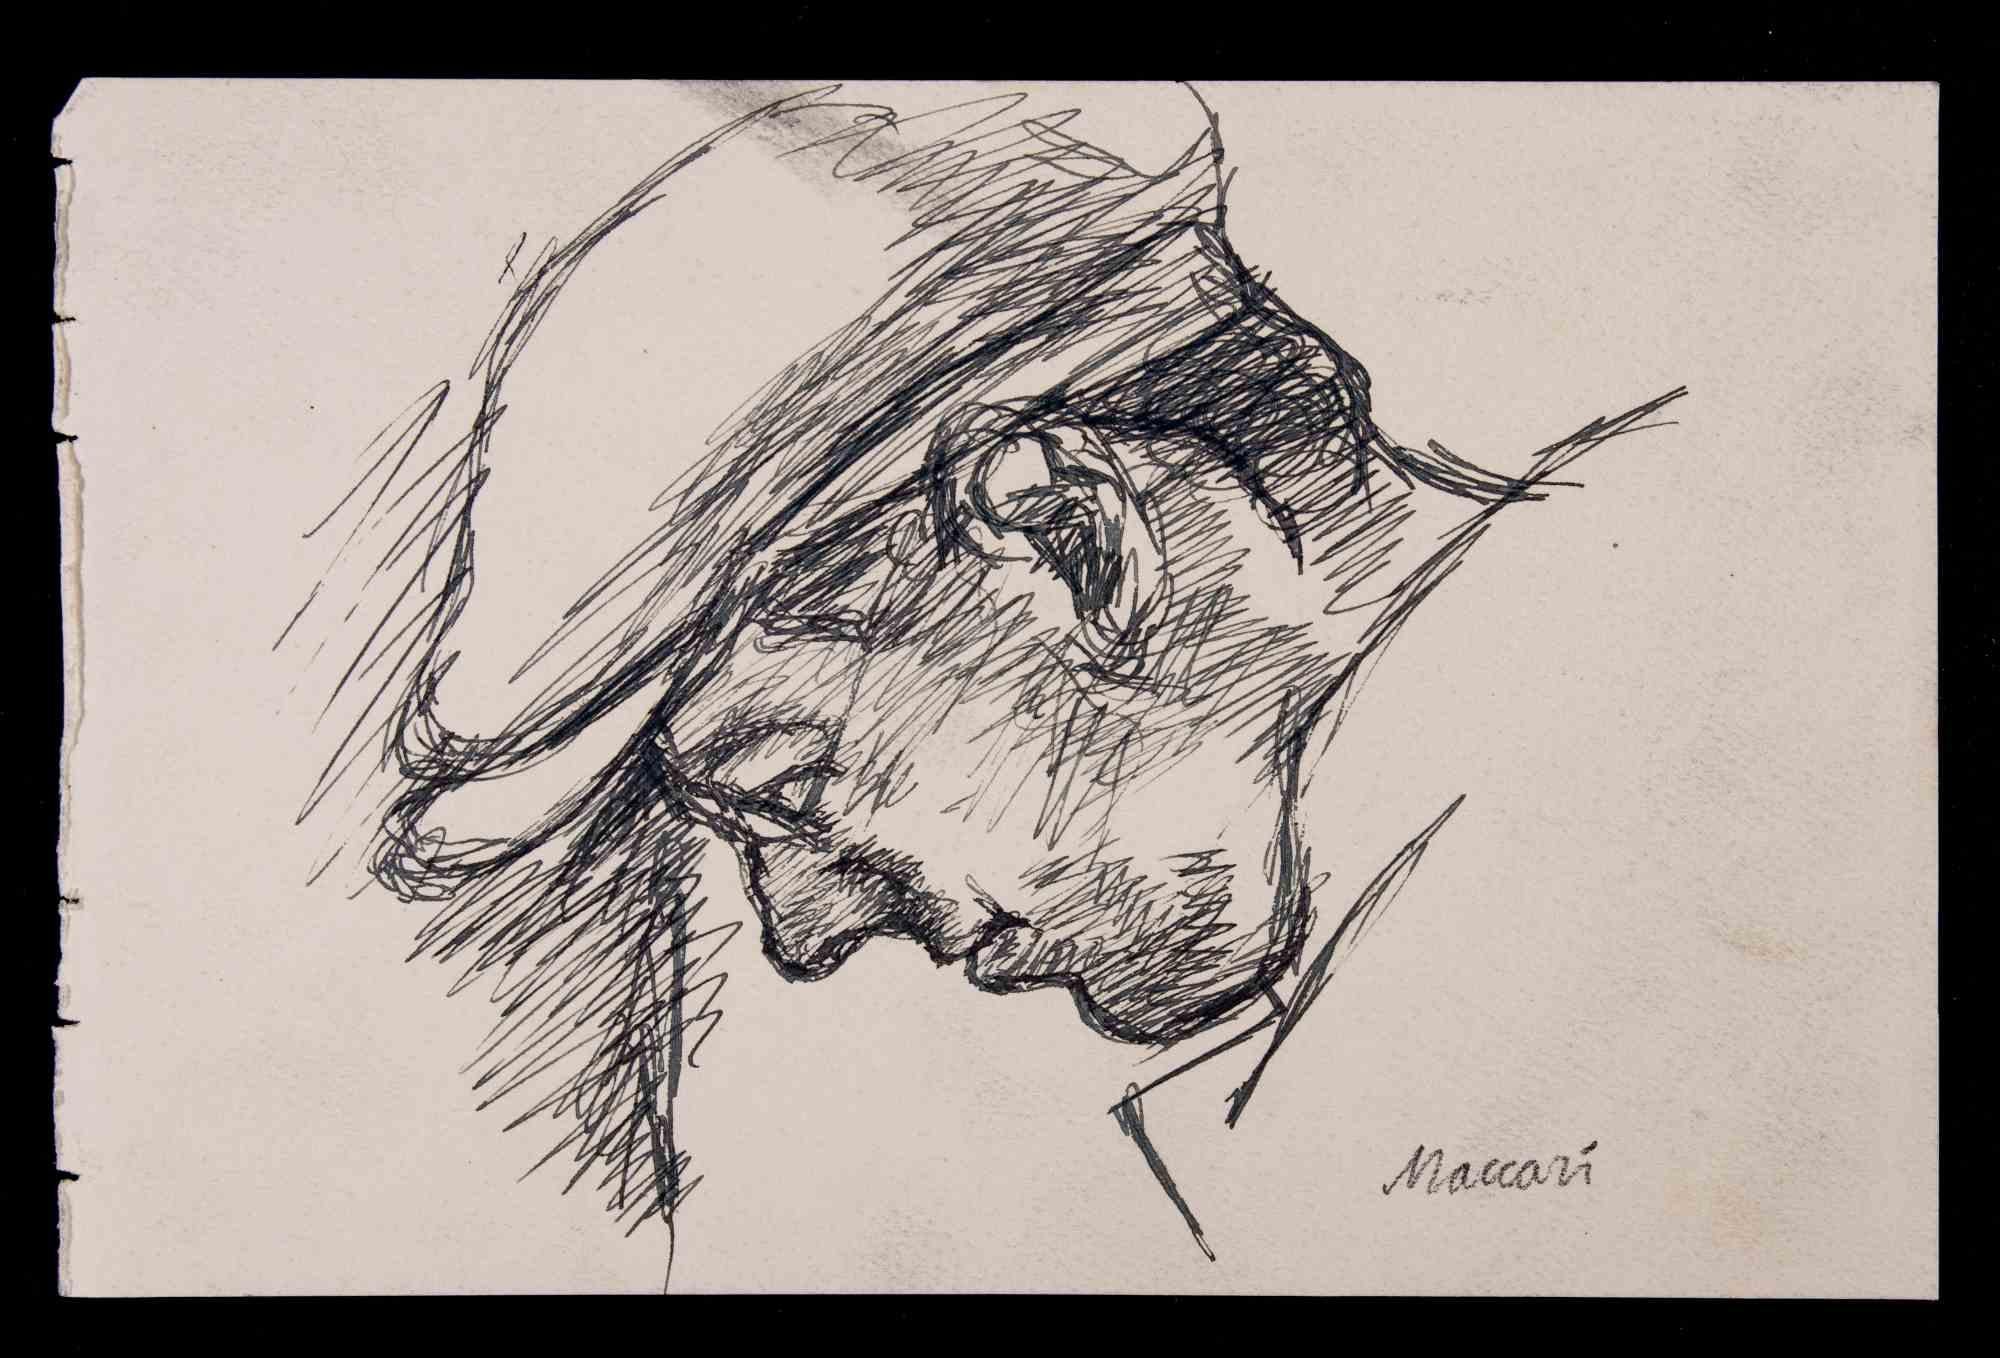 Portrait is a Pen Drawing realized by Mino Maccari  (1924-1989) in 1928.

Hand-signed on the lower margin.

Good condition on a little paper.

Mino Maccari (Siena, 1924-Rome, June 16, 1989) was an Italian writer, painter, engraver and journalist,